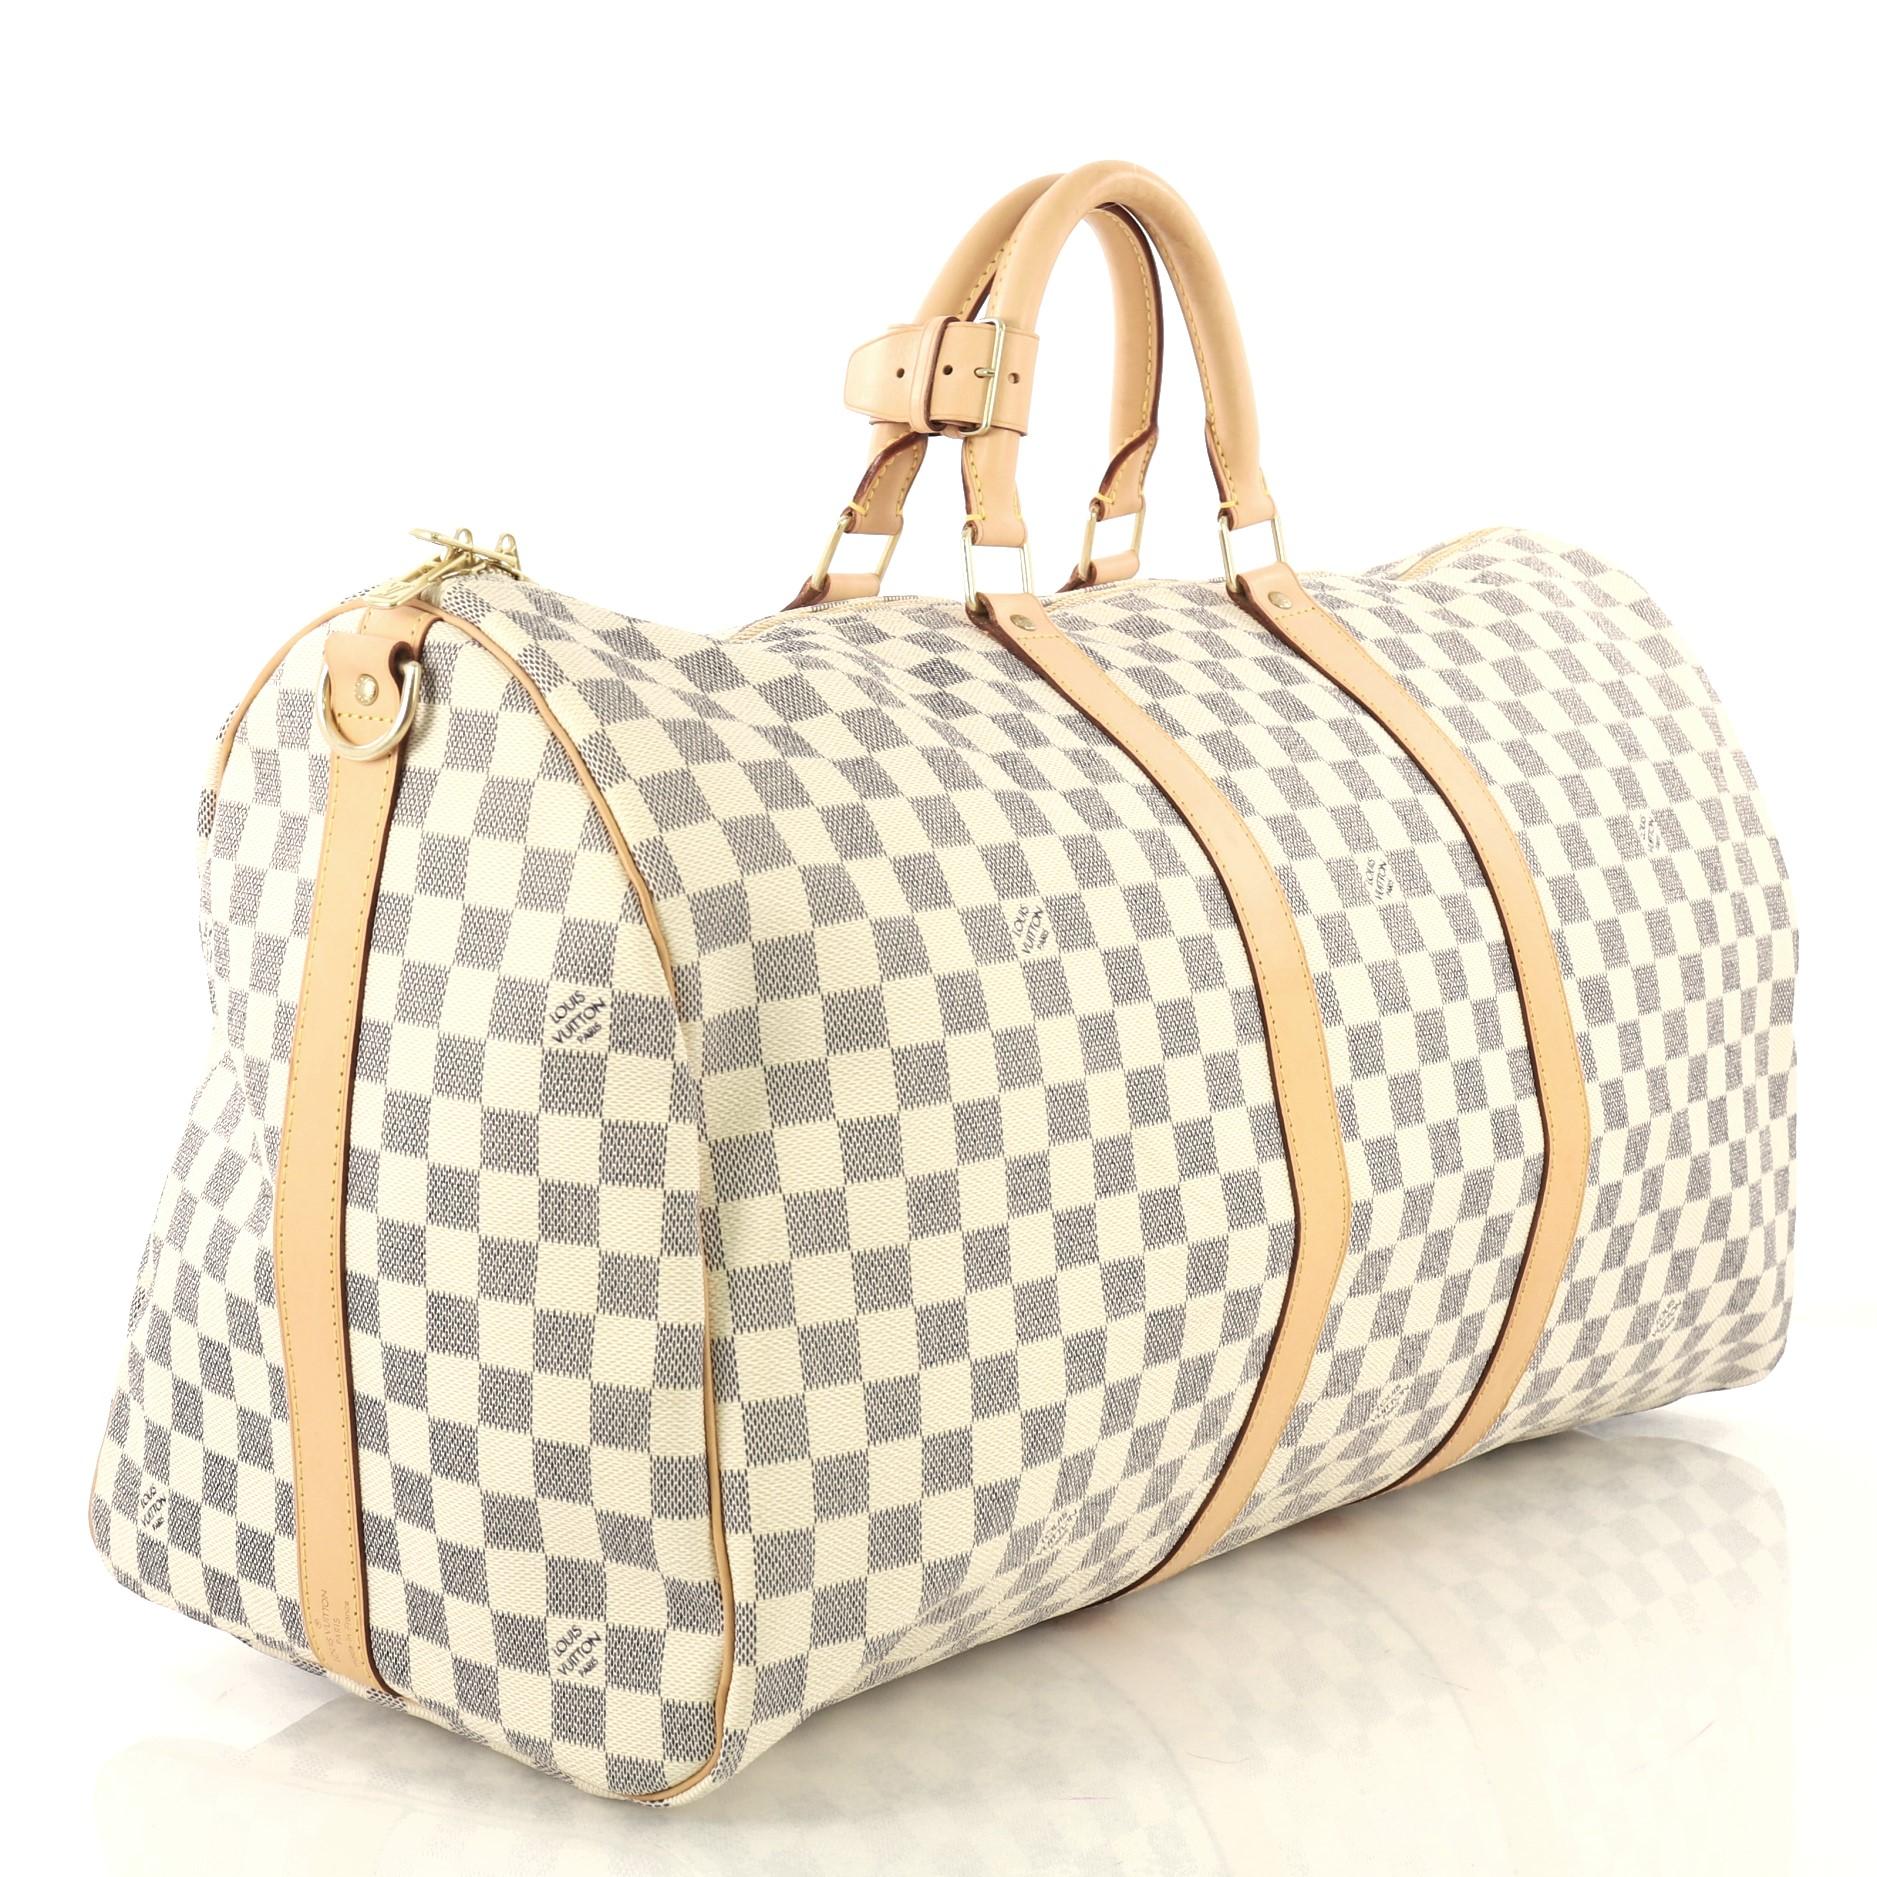 This Louis Vuitton Keepall Bandouliere Bag Damier 55, crafted from damier azur coated canvas, features dual rolled handles, leather trim, and gold-tone hardware. Its two-way top zip closure opens to a beige fabric interior. Authenticity code reads: